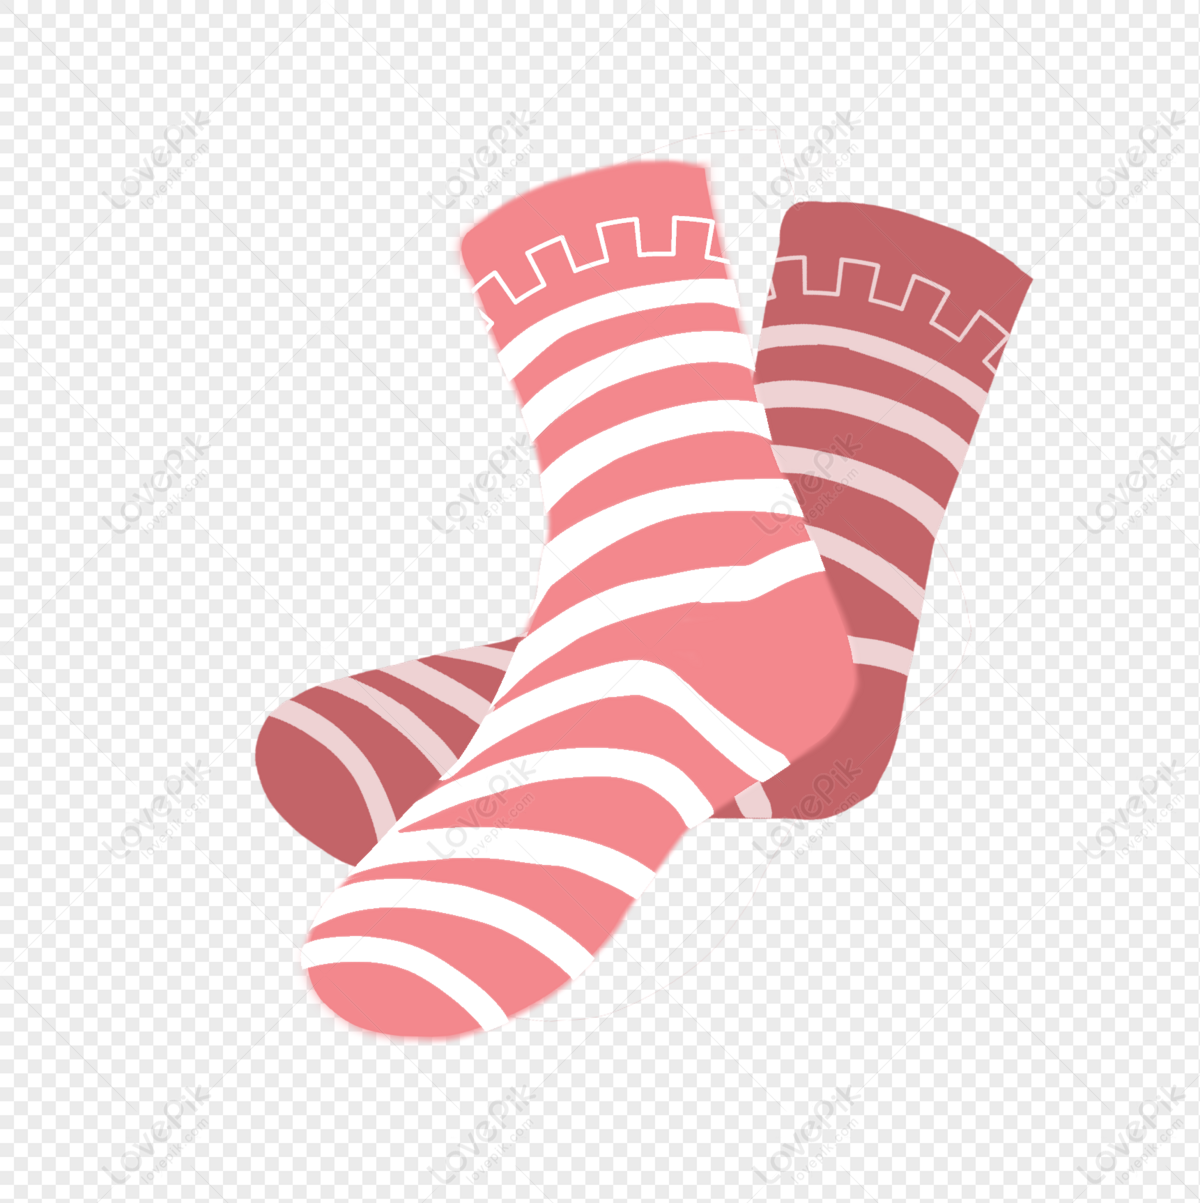 Socks 1 Free PNG And Clipart Image For Free Download - Lovepik | 401230989